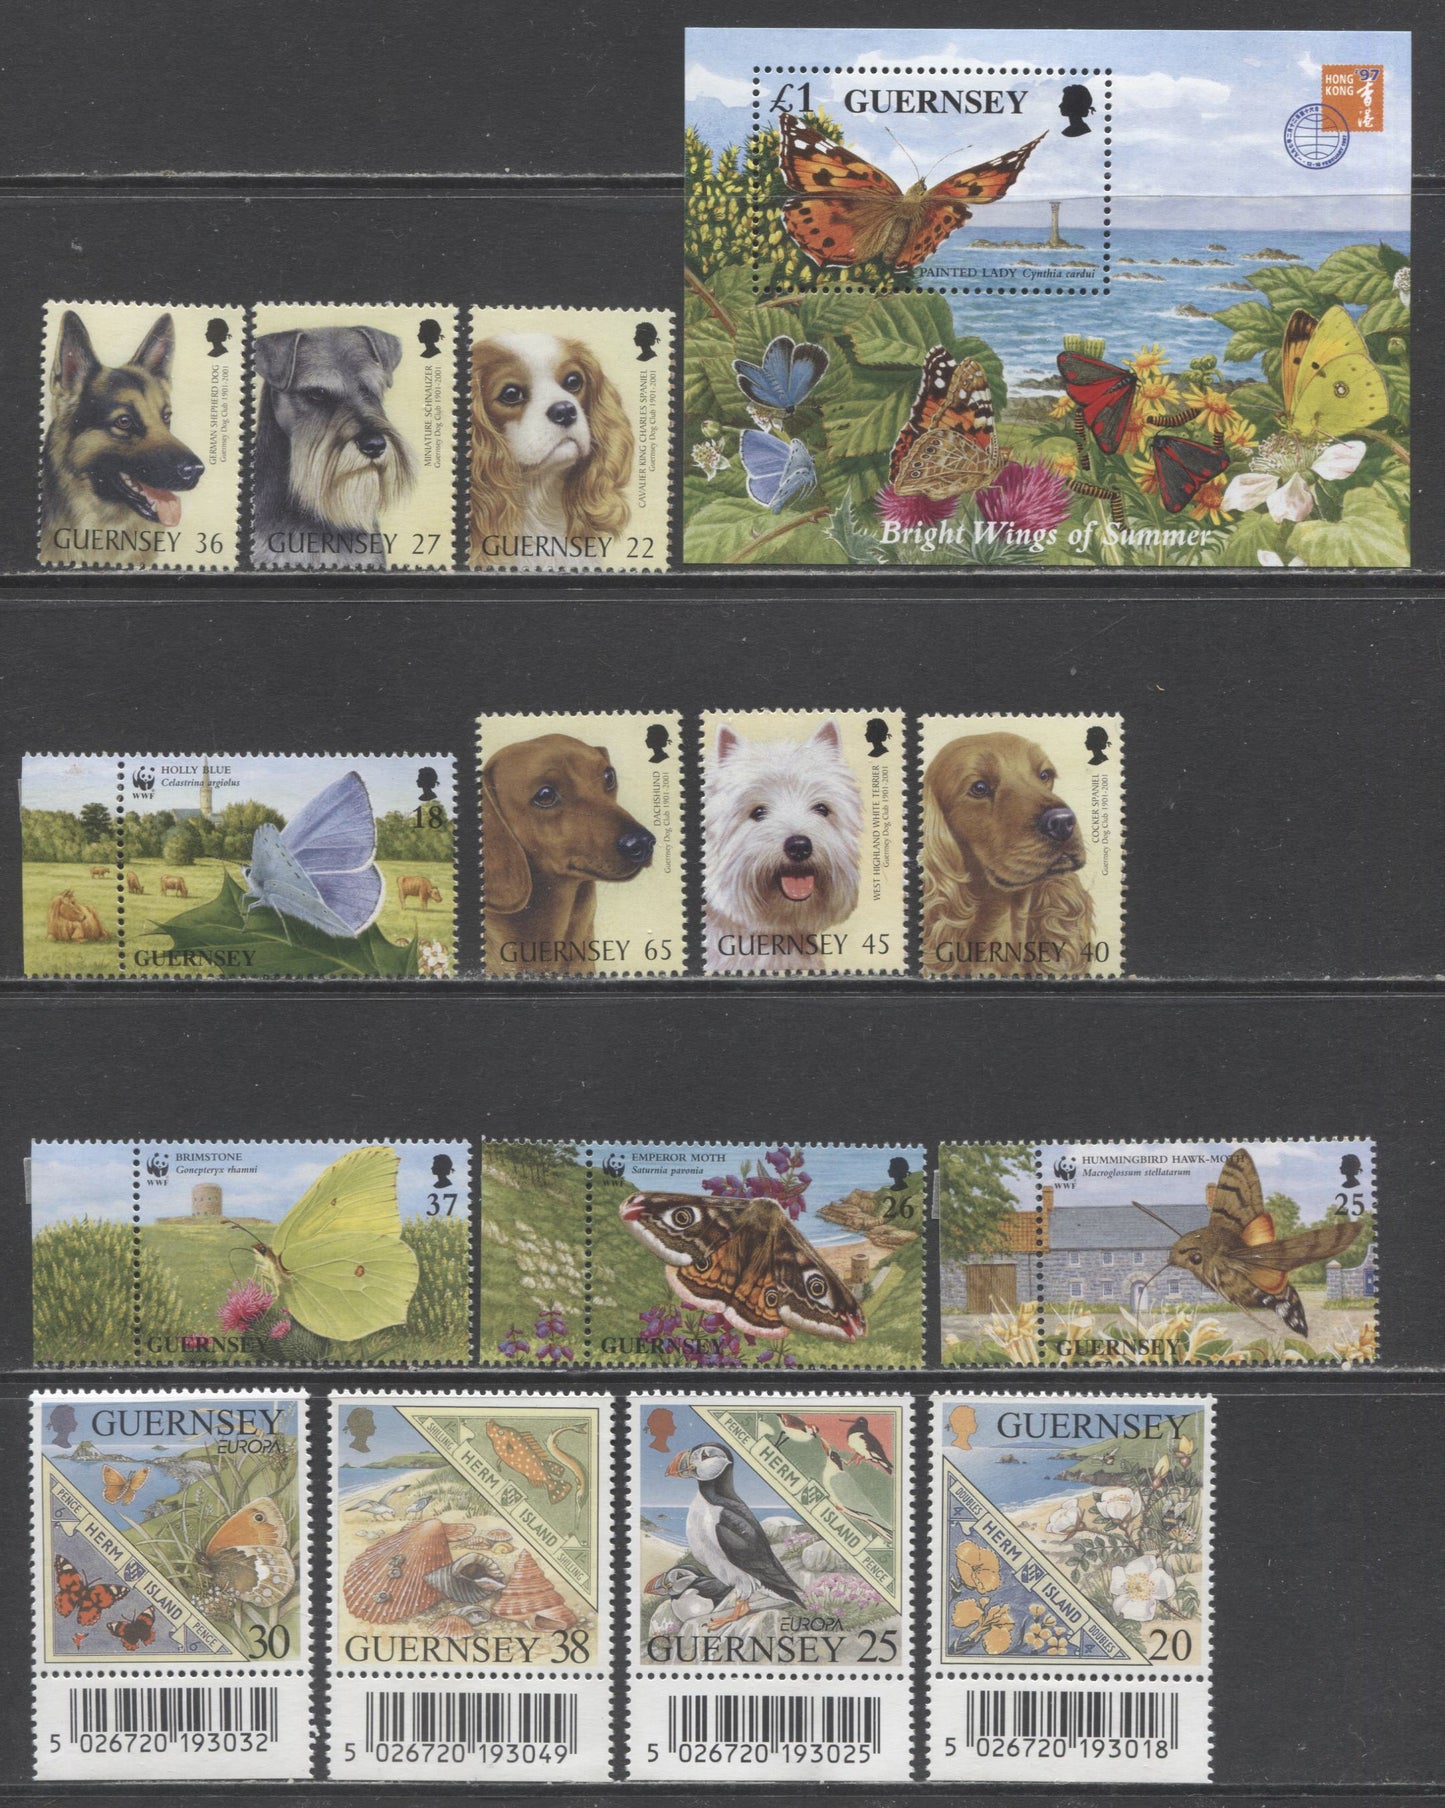 Lot 29 Great Britain - Guernsey SC#586/941 1997-2001 Butterflies & Moths, Herm Island & Dogs Issues, 15 VFOG/NH Singles & Souvenir Sheet, Click on Listing to See ALL Pictures, 2017 Scott Cat. $18.15